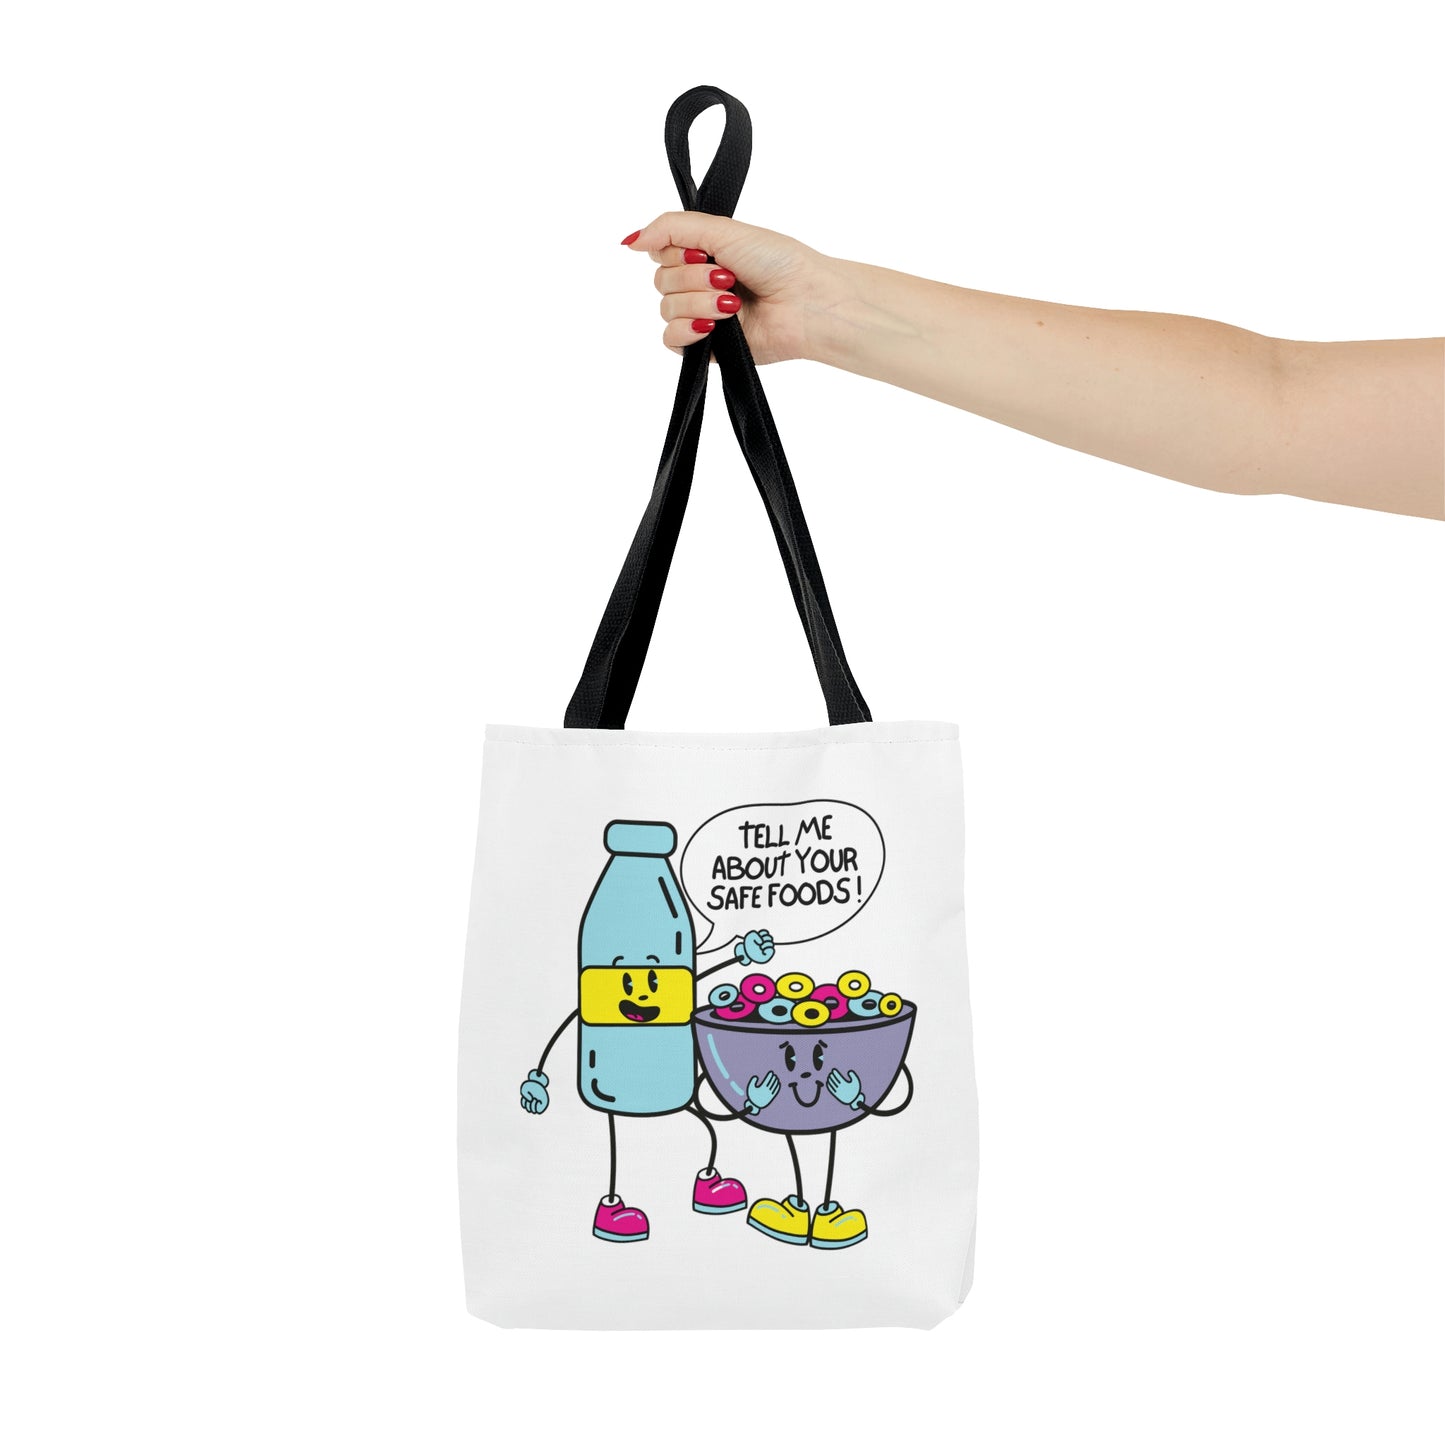 "Tell Me About Your Safe Foods!" Tote Bag in 3 sizes